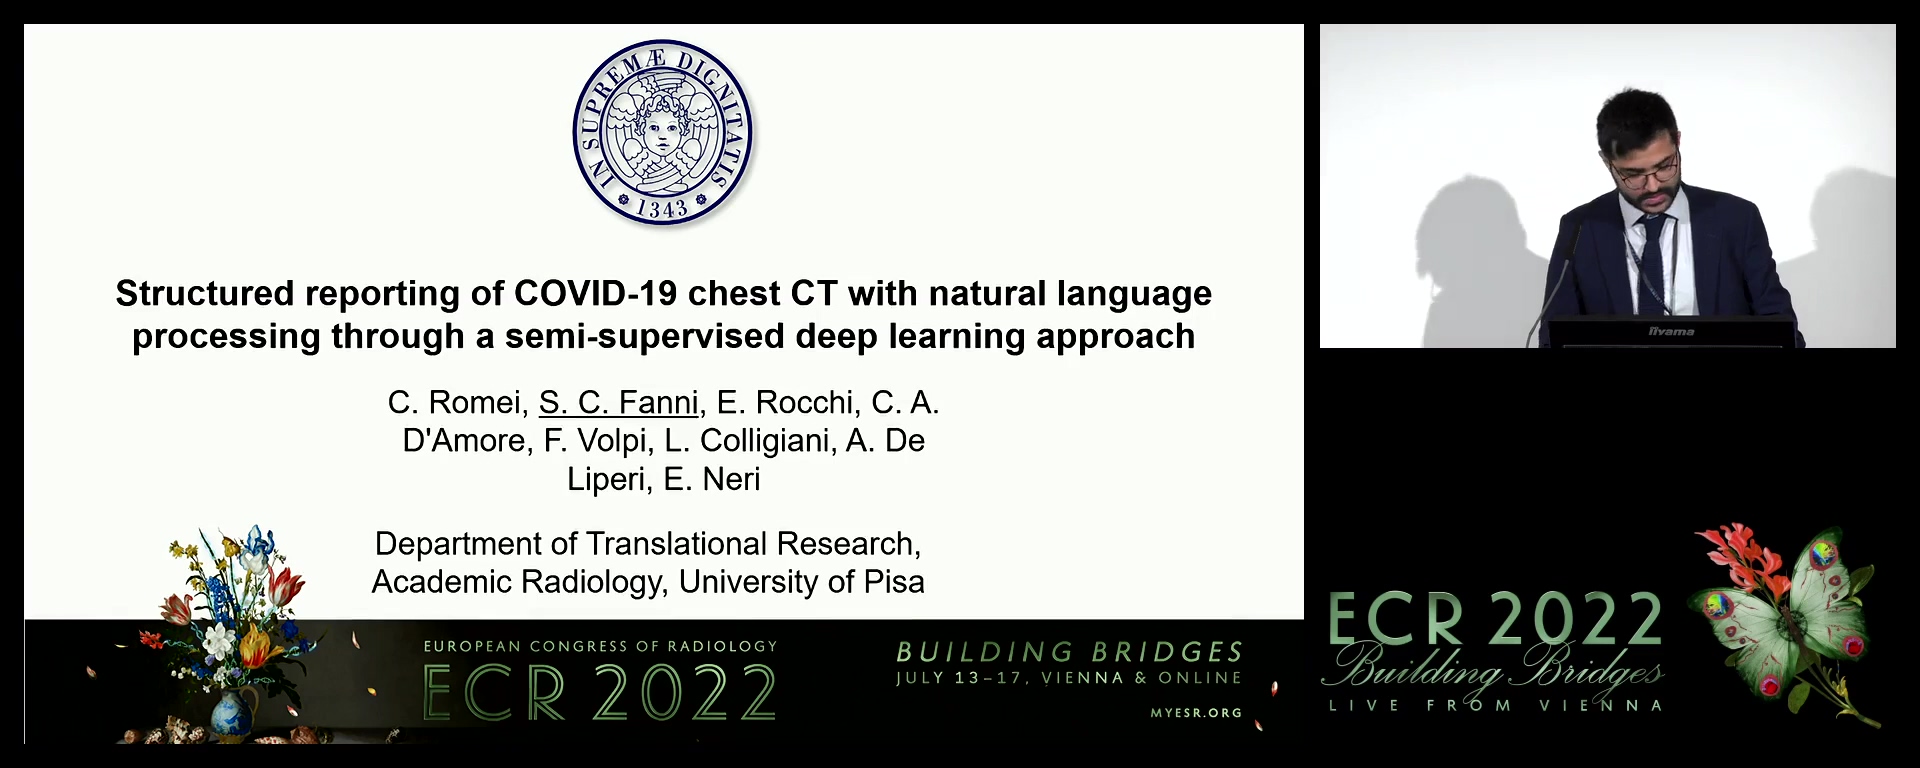 Structured reporting of COVID-19 chest CT with natural language processing through a semi-supervised deep learning approach - Salvatore Fanni, Pisa / IT